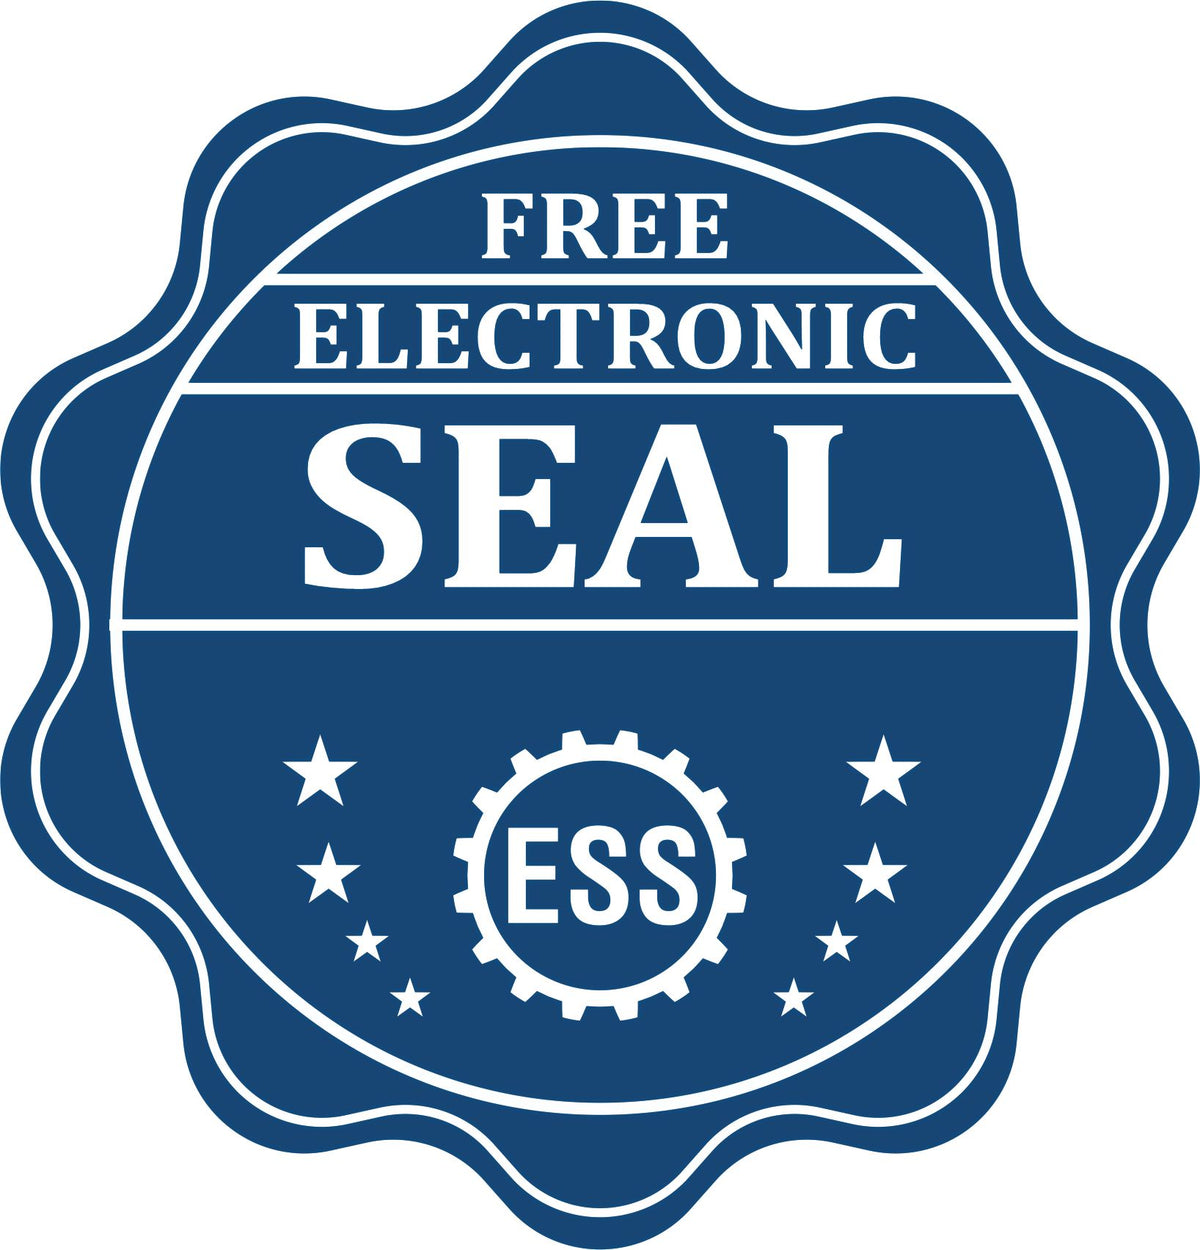 A badge showing a free electronic seal for the California Engineer Desk Seal with stars and the ESS gear on the emblem.